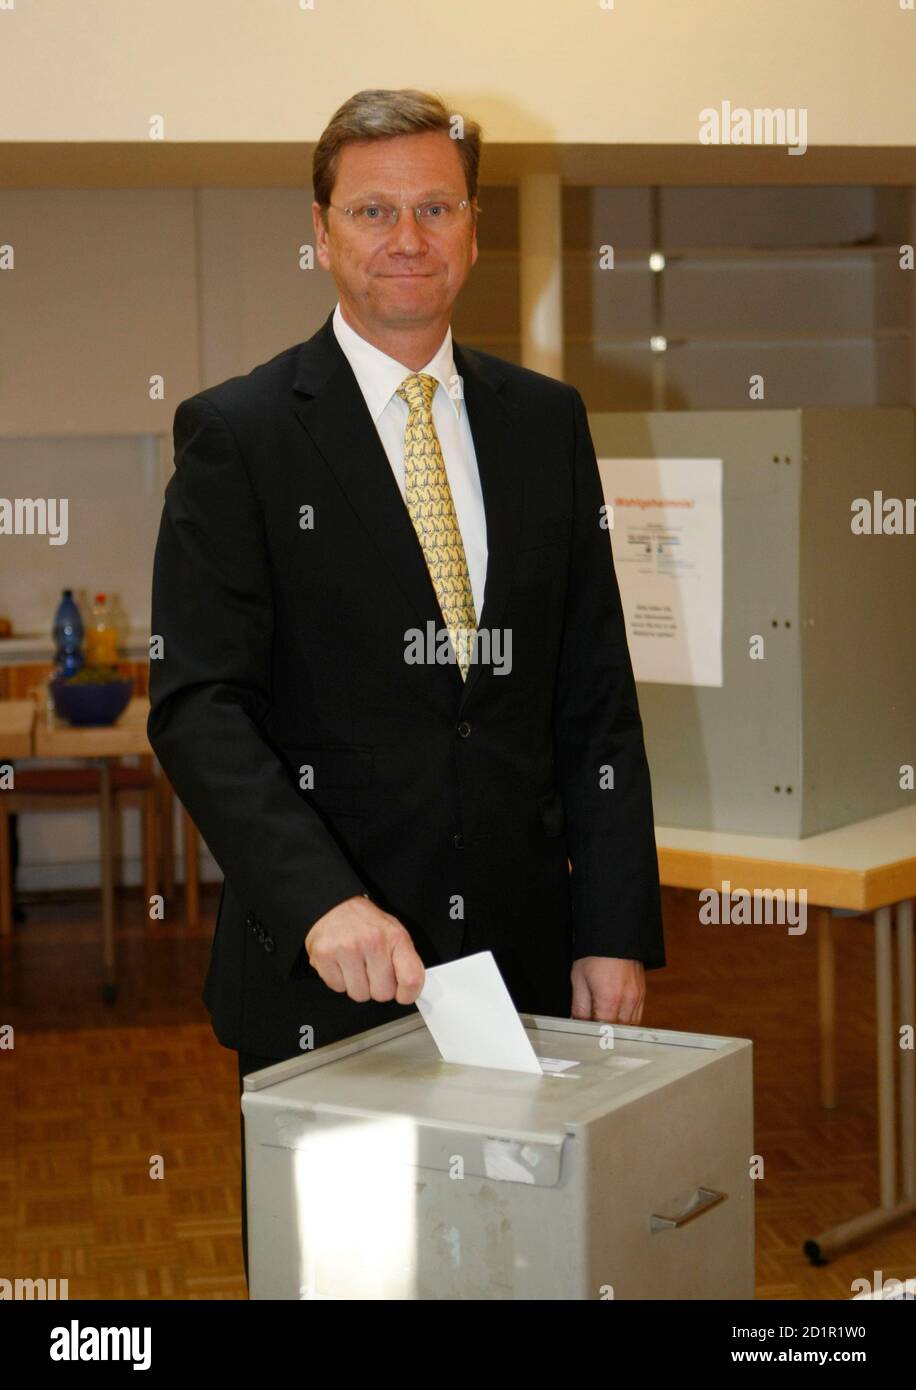 Guido Westerwelle, leader of the pro-business Free Democratic Party (FDP) casts his ballot in the general election at a polling station in Bonn September 27, 2009. Germans voted in the general election (Bundestagwahl) on Sunday.  REUTERS/Ina Fassbender (GERMANY POLITICS ELECTIONS) Stock Photo